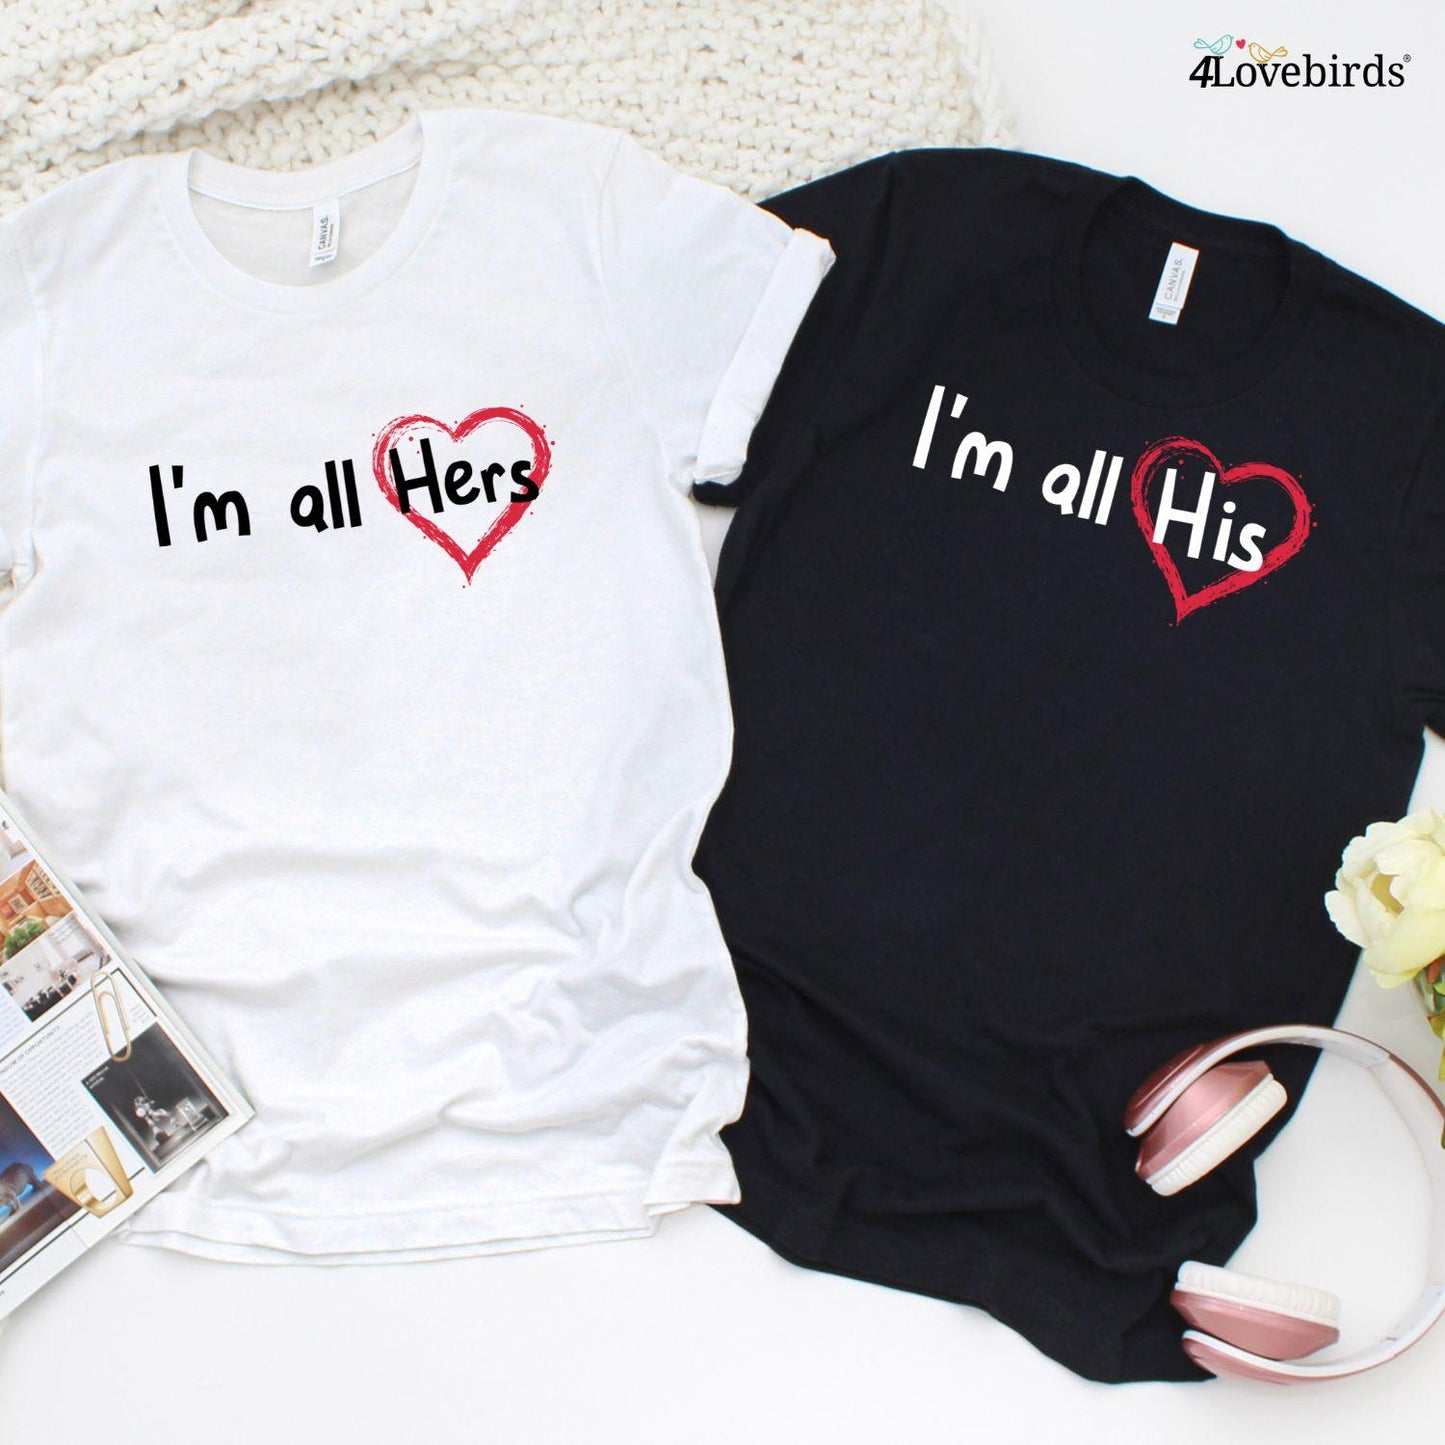 I'm All Hers and I'm All His Set - Perfect for Honeymoon or Anniversary Surprise, Unique Couple's Gift Sets! - 4Lovebirds